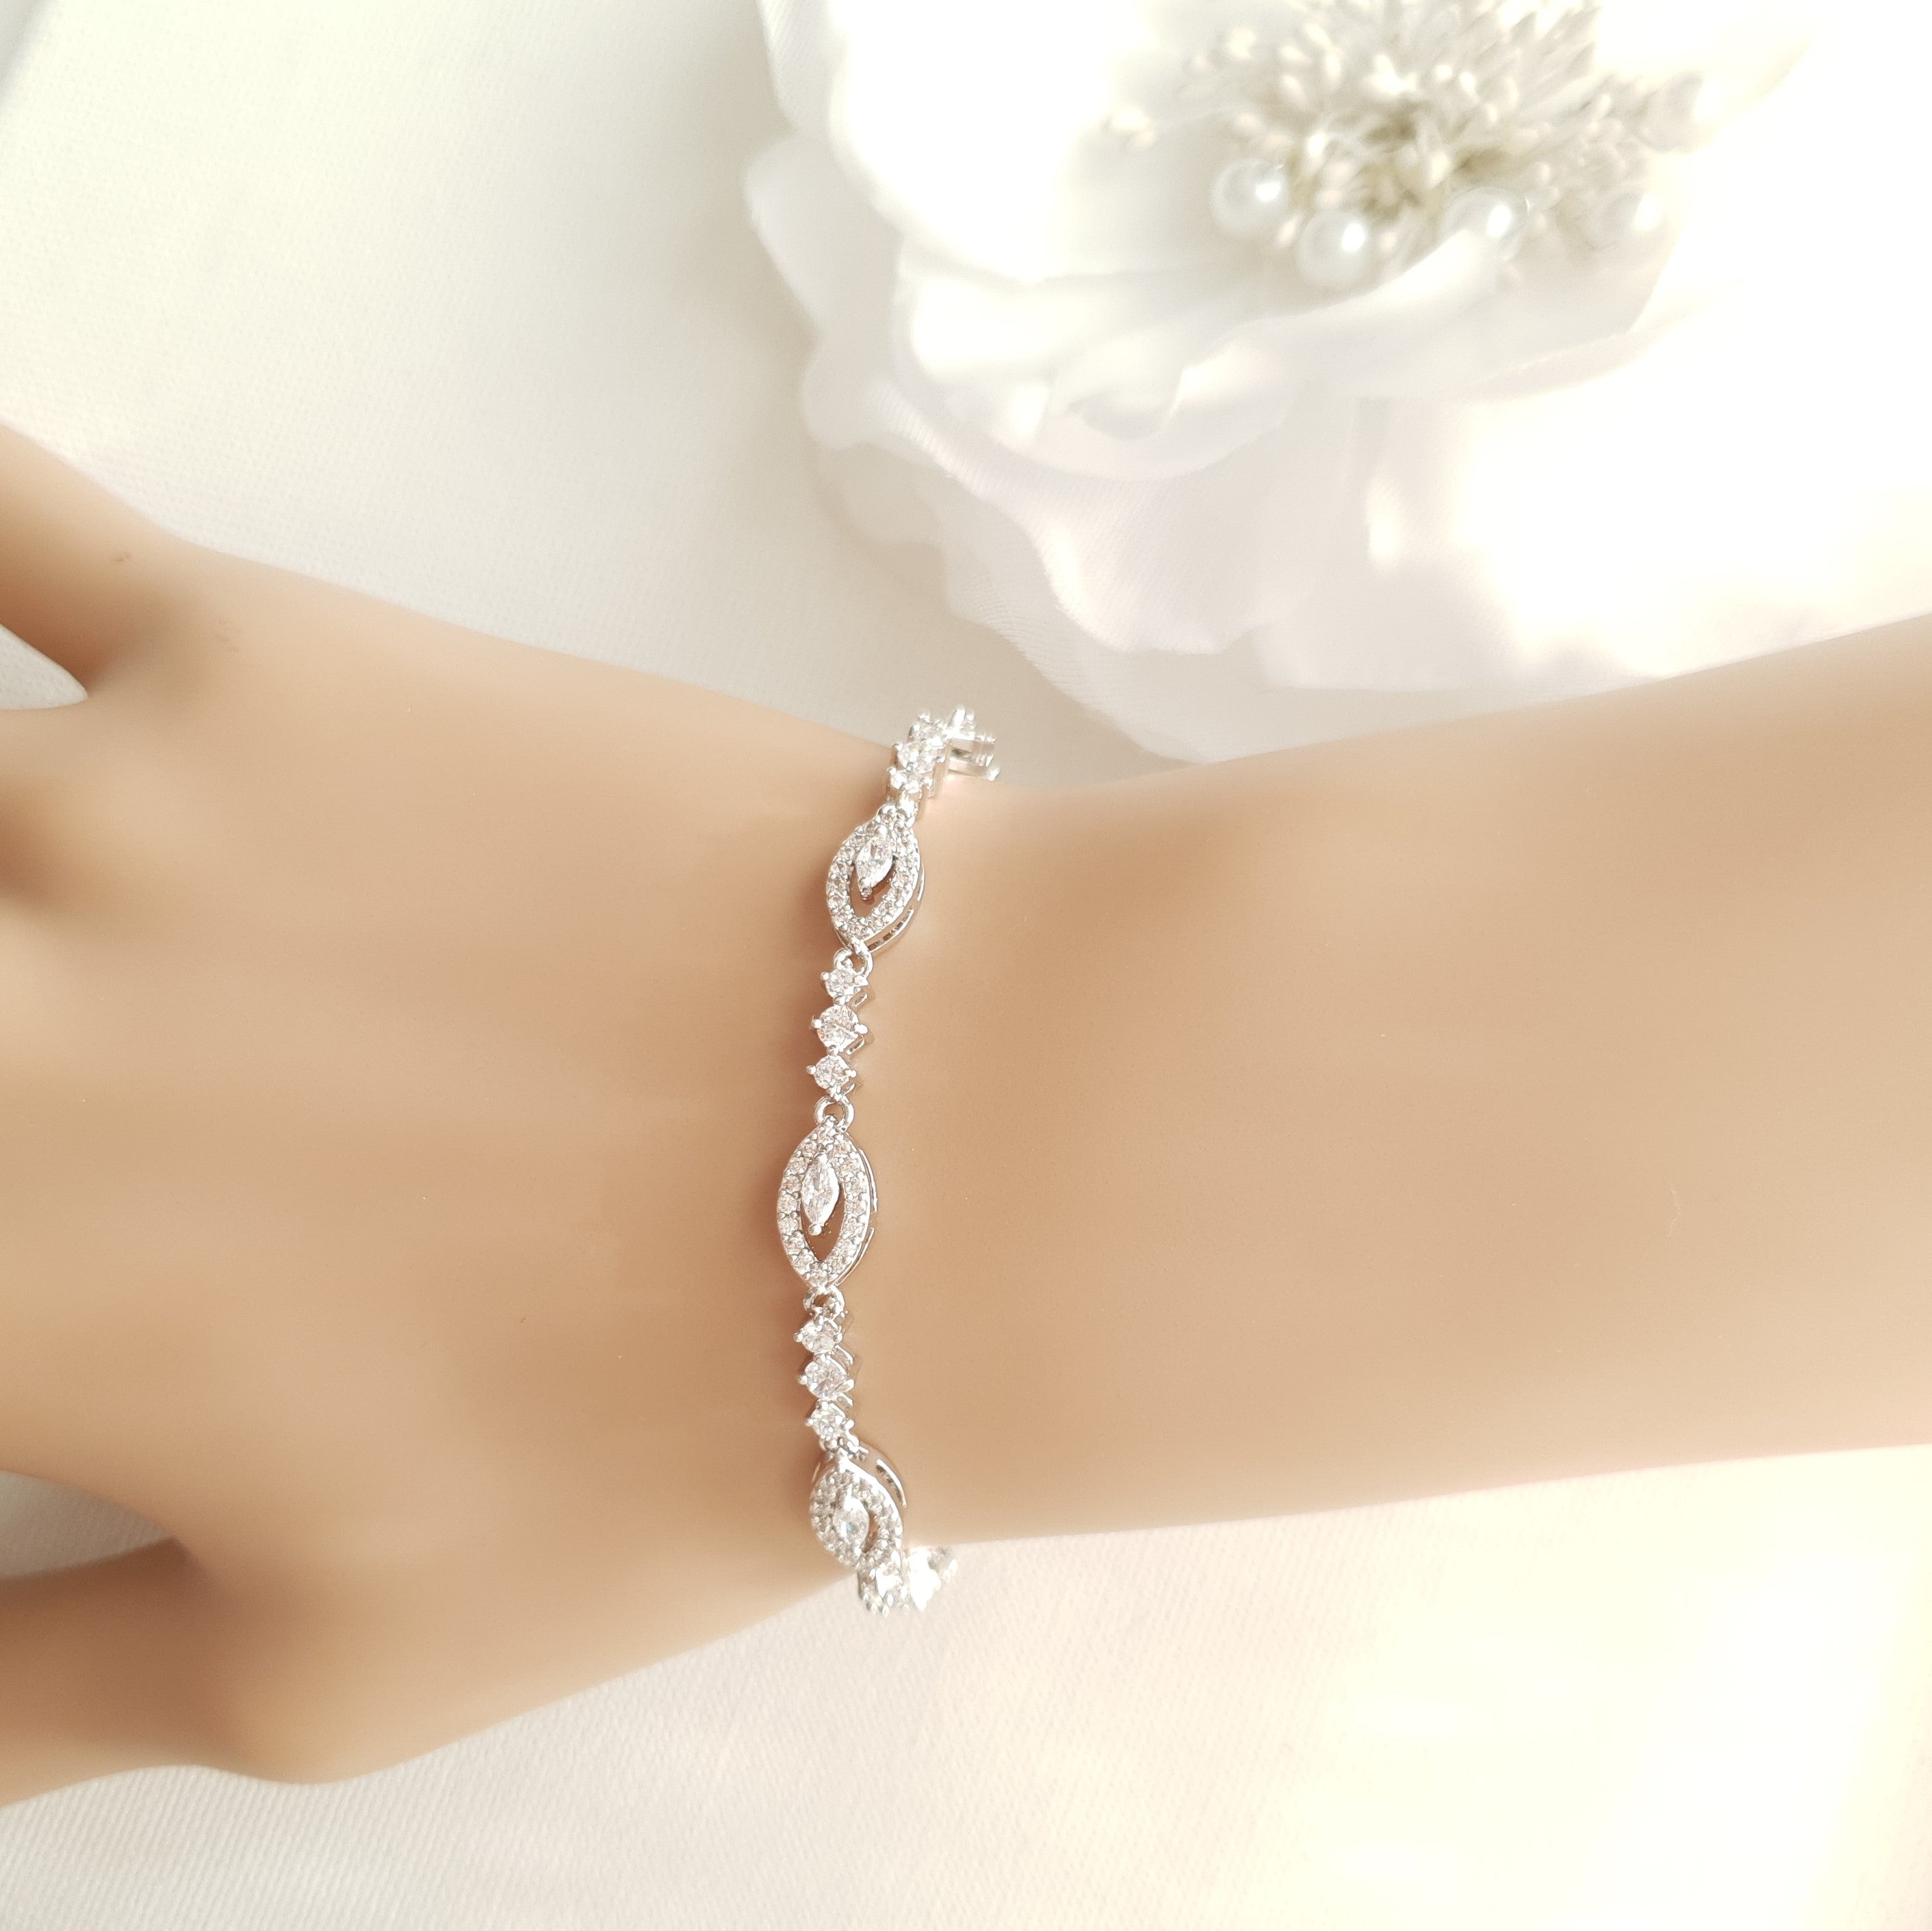 Buy quality Sterling silver ladies bracelet in yellow and silver platting  in New Delhi